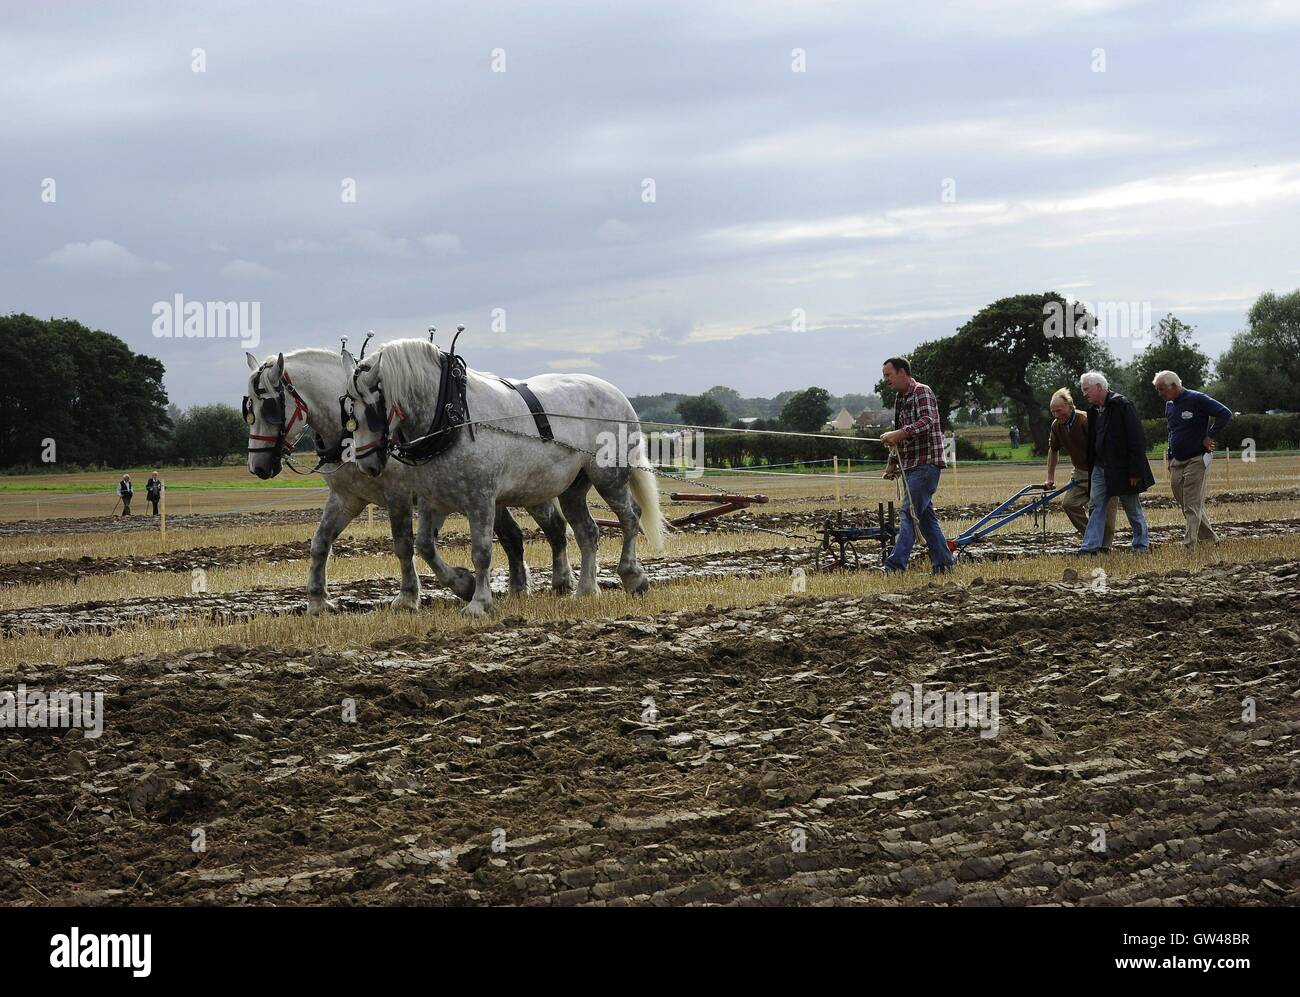 J J Delaney, from Cork, represents Ireland in the horse ploughing at the World Ploughing Contest at Crockey Hill near York, where representatives from over thirty countries competed in various categories that included vintage and horse drawn alongside conventional tractors. Stock Photo